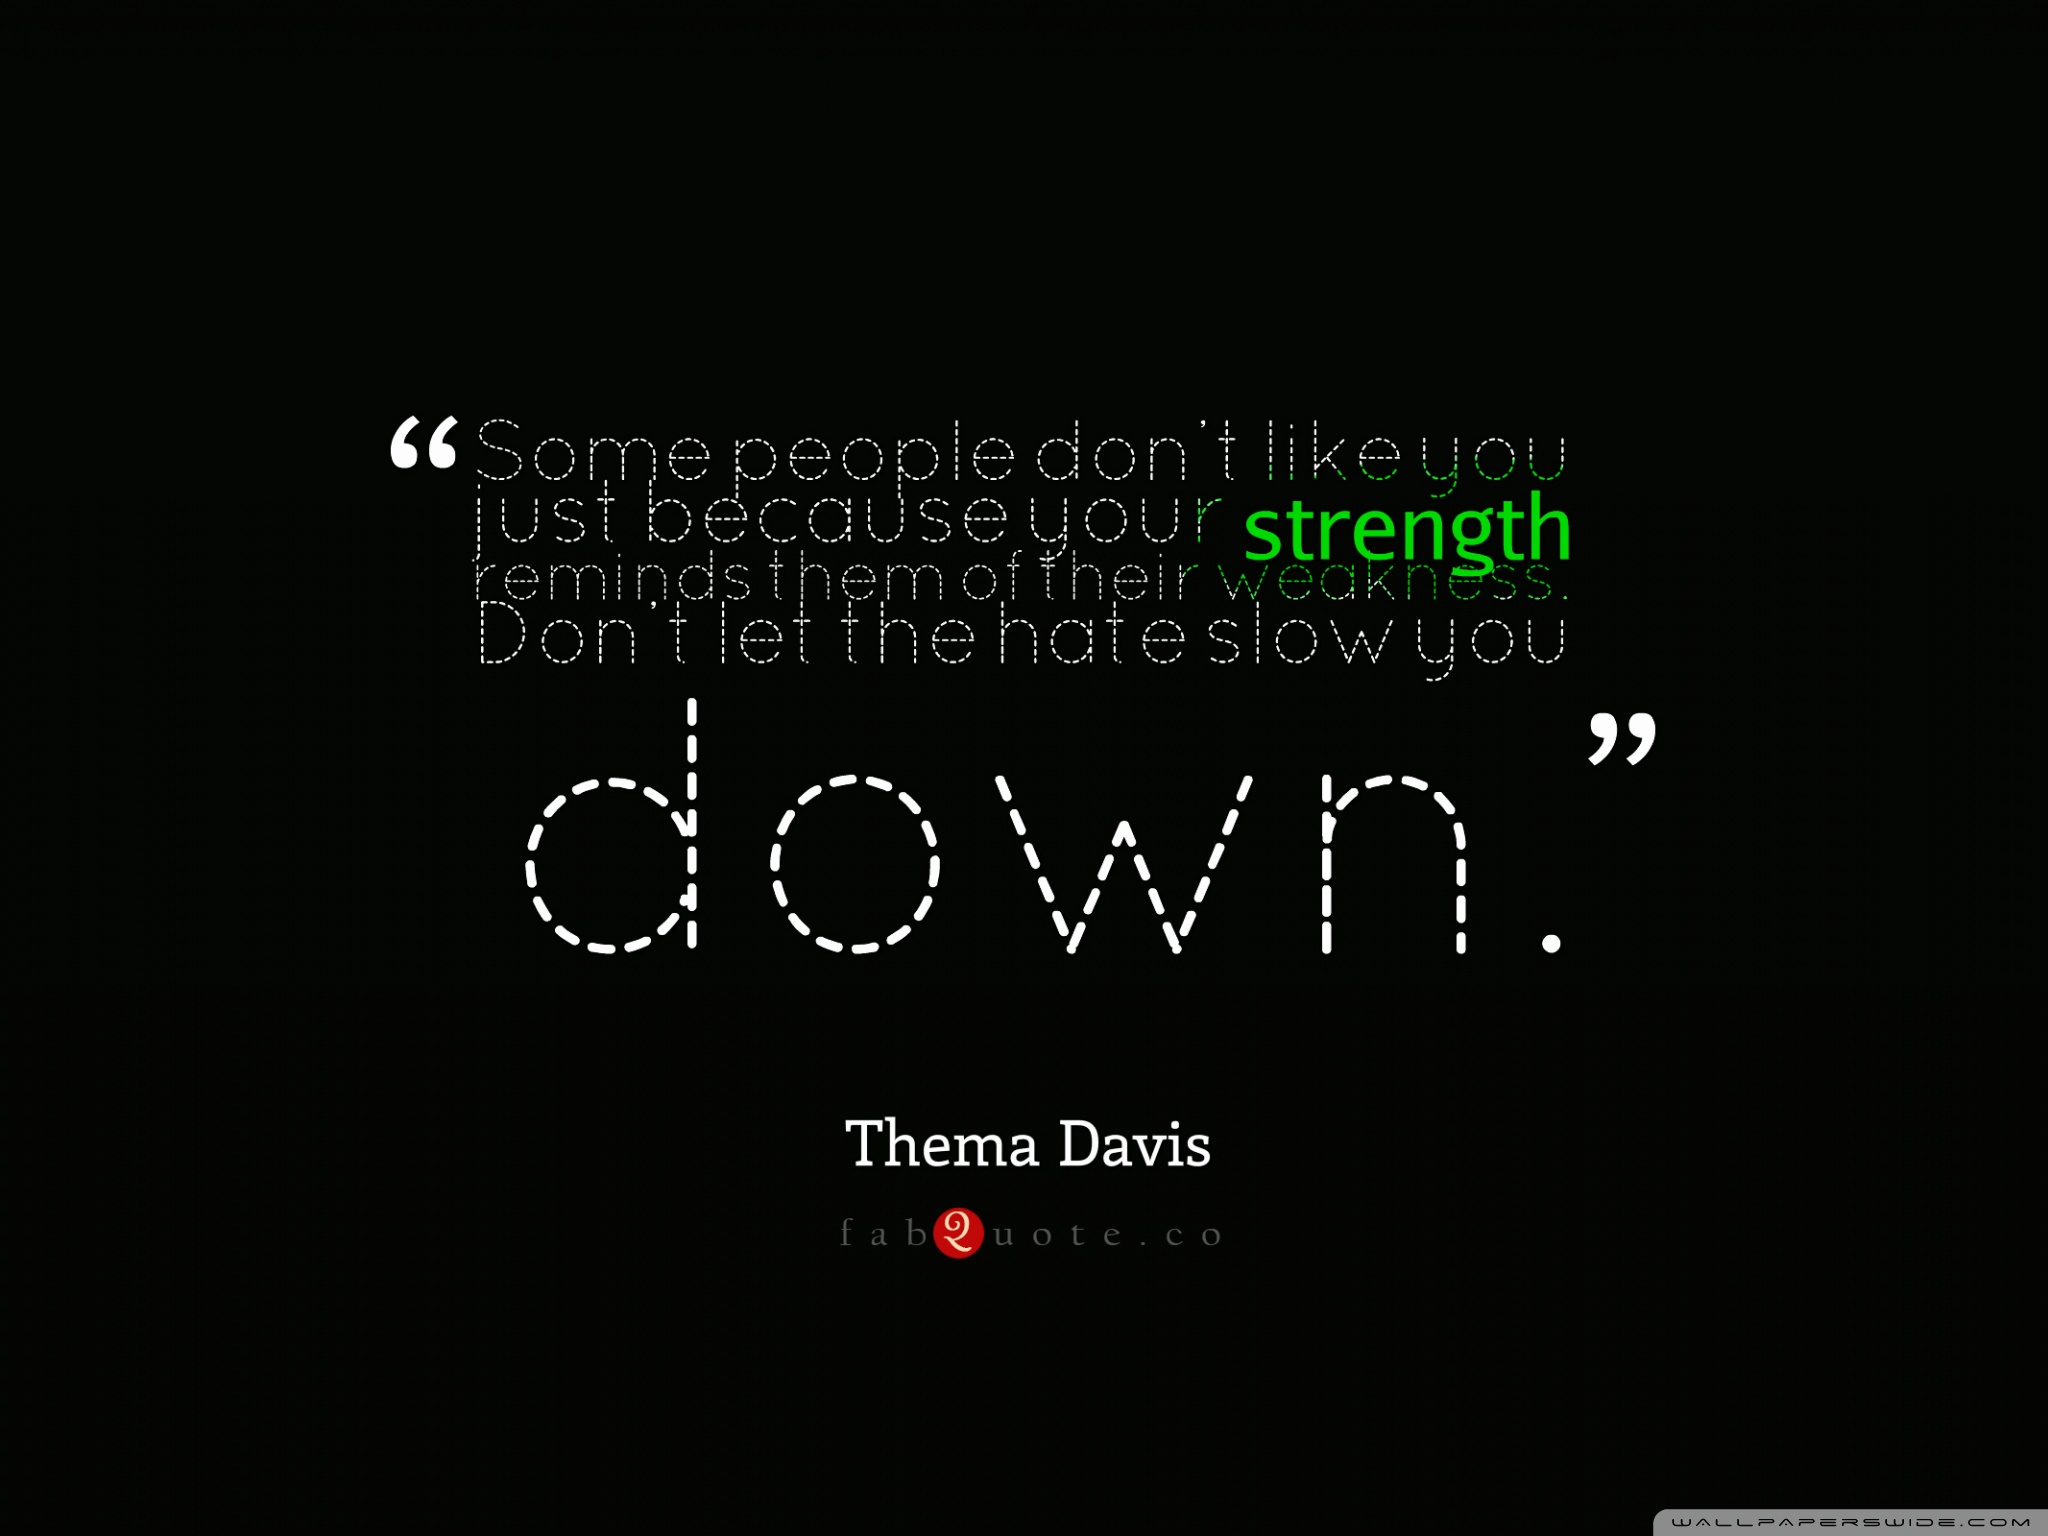 Thema Davis Quote About Strength And Weakness 4k HD Desktop